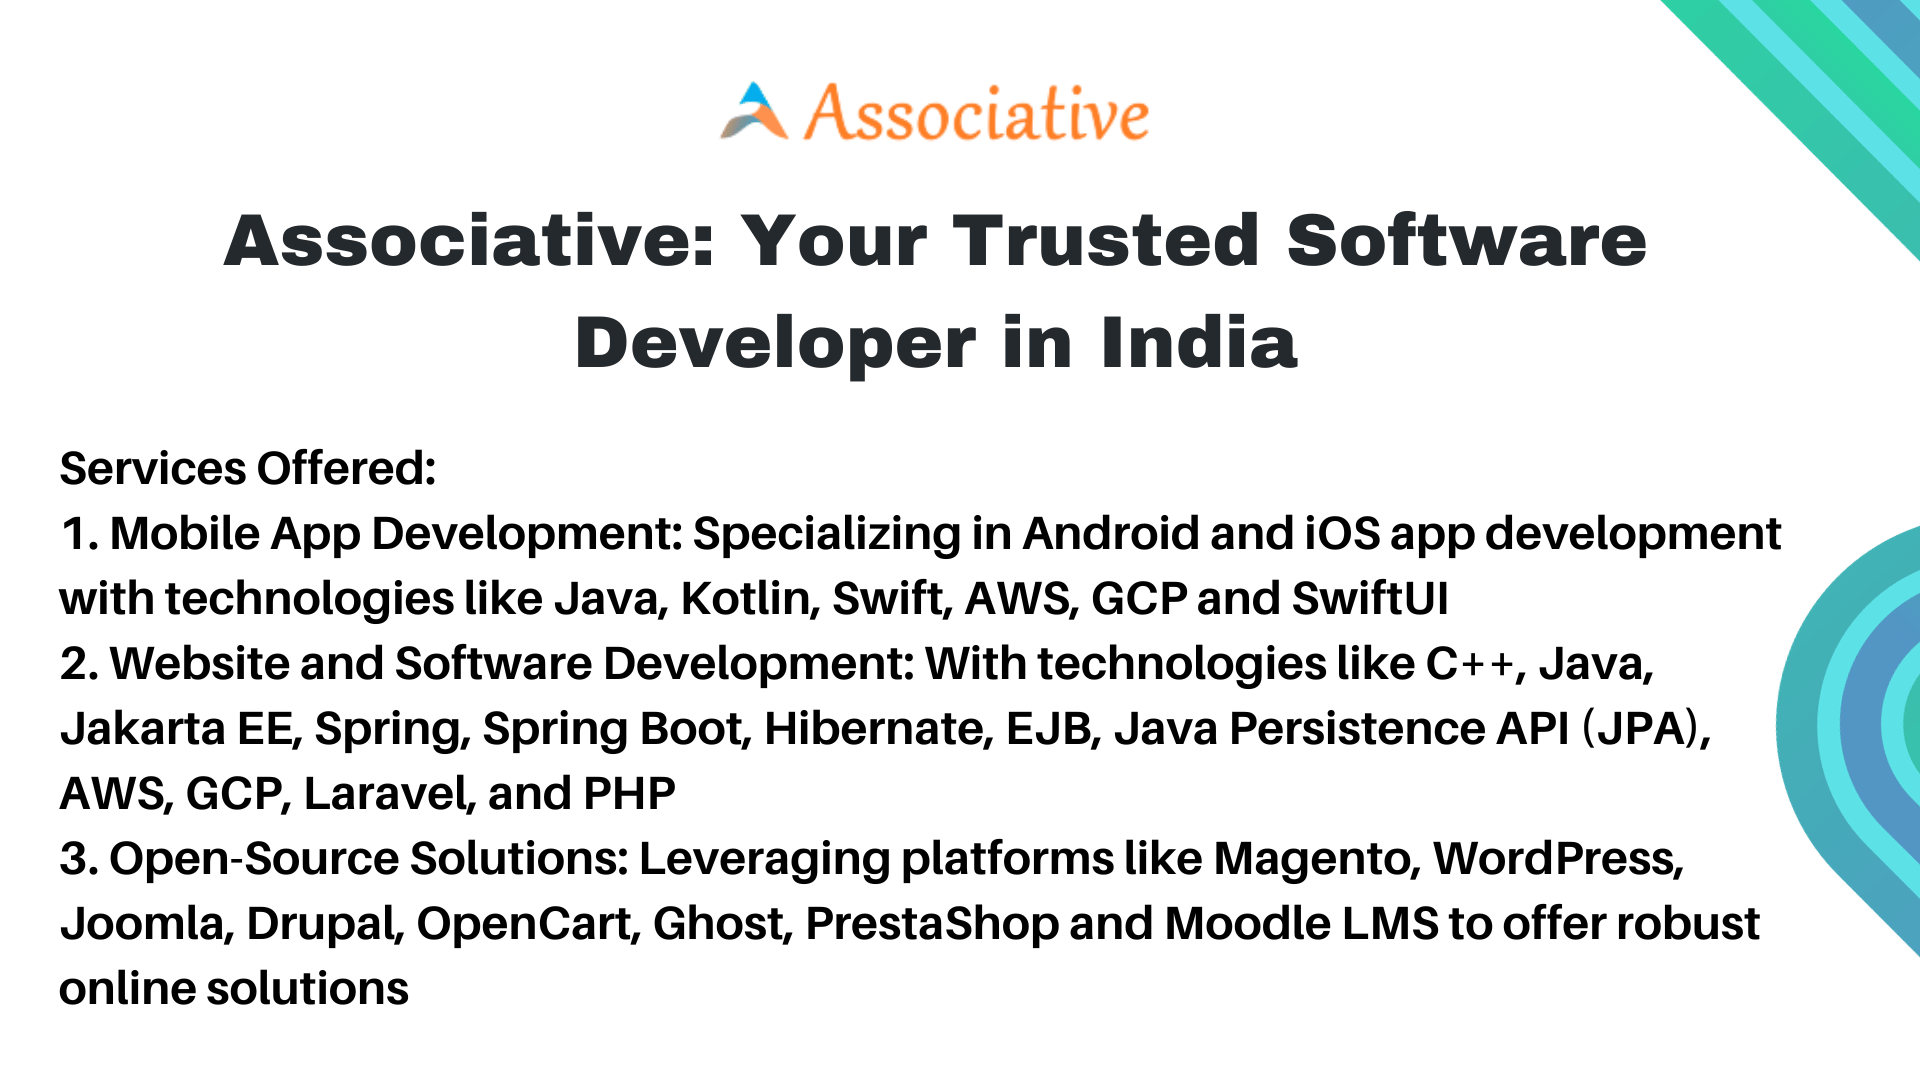 Associative Your Trusted Software Developer in India